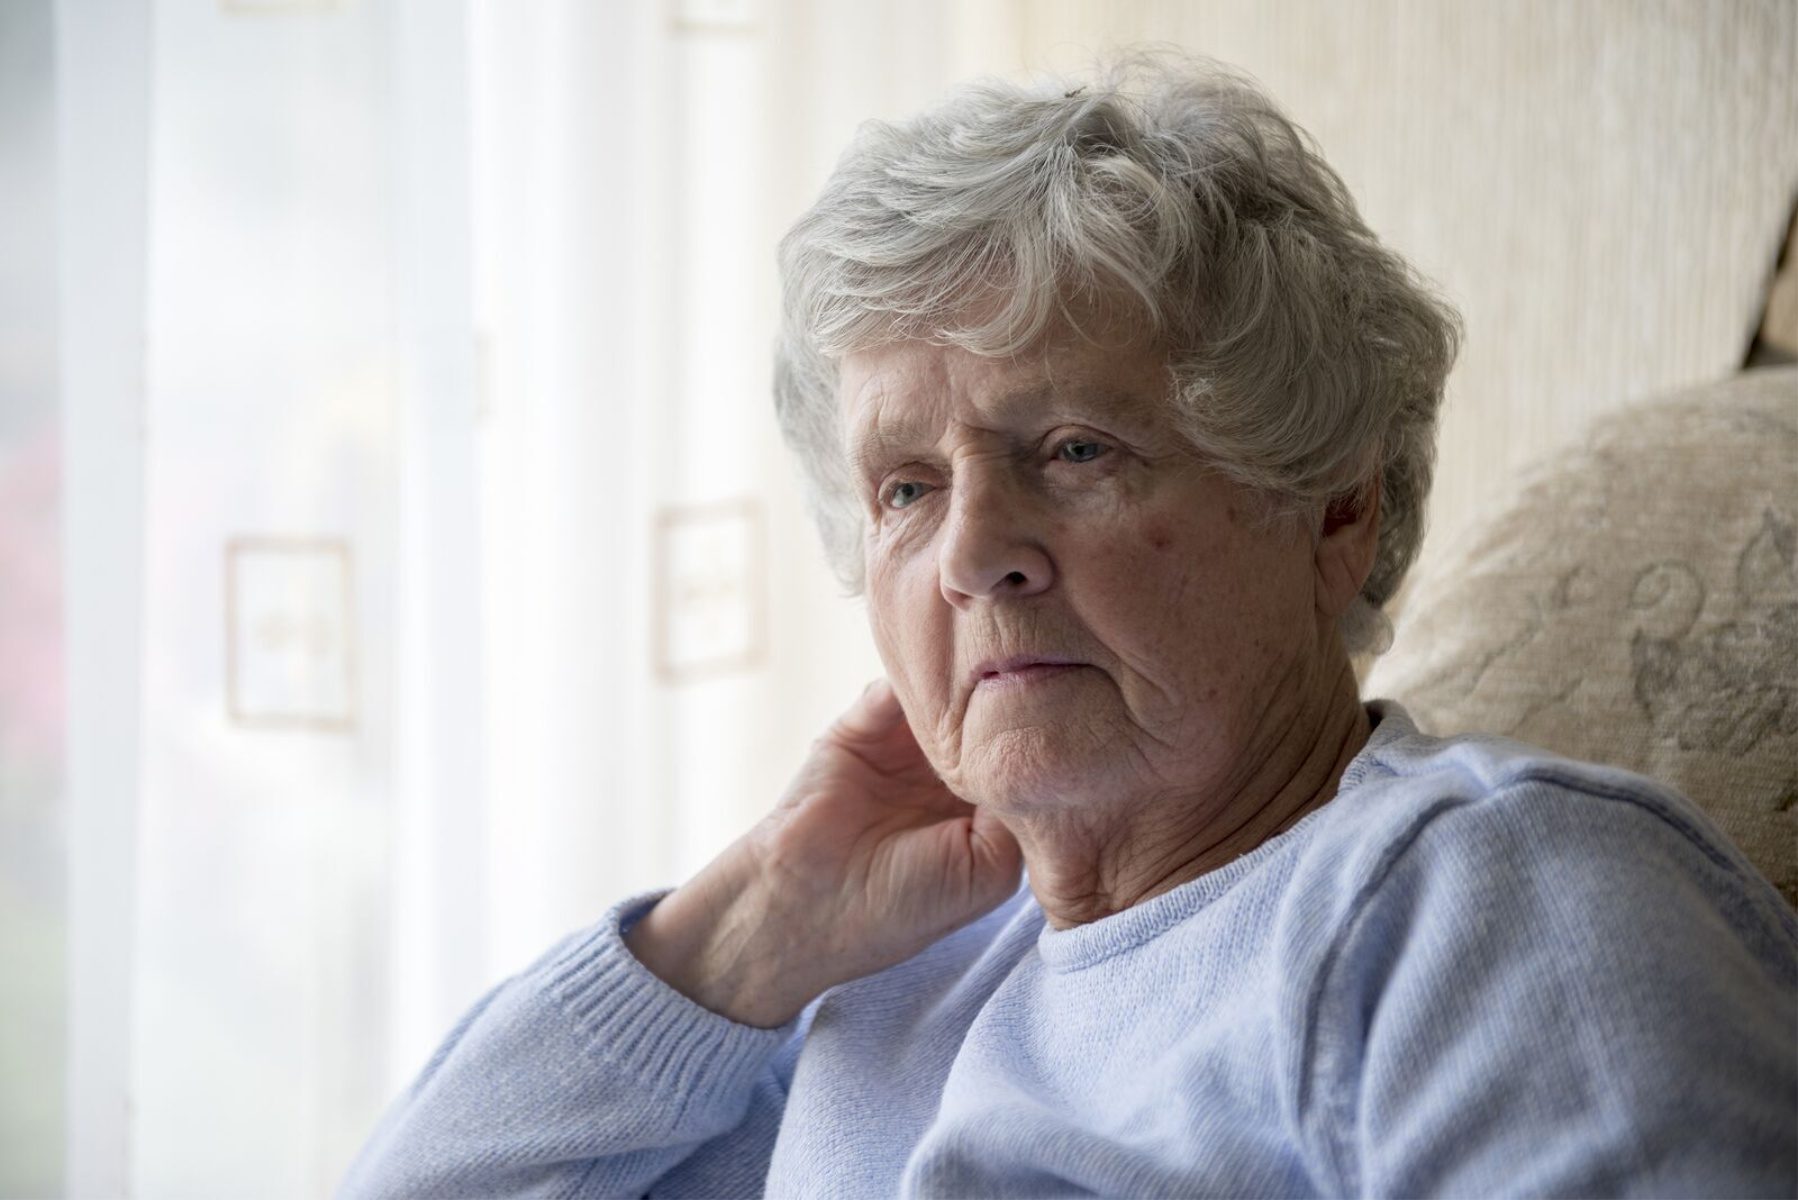 Home Health Care in Boston MA: Self Isolating Tips